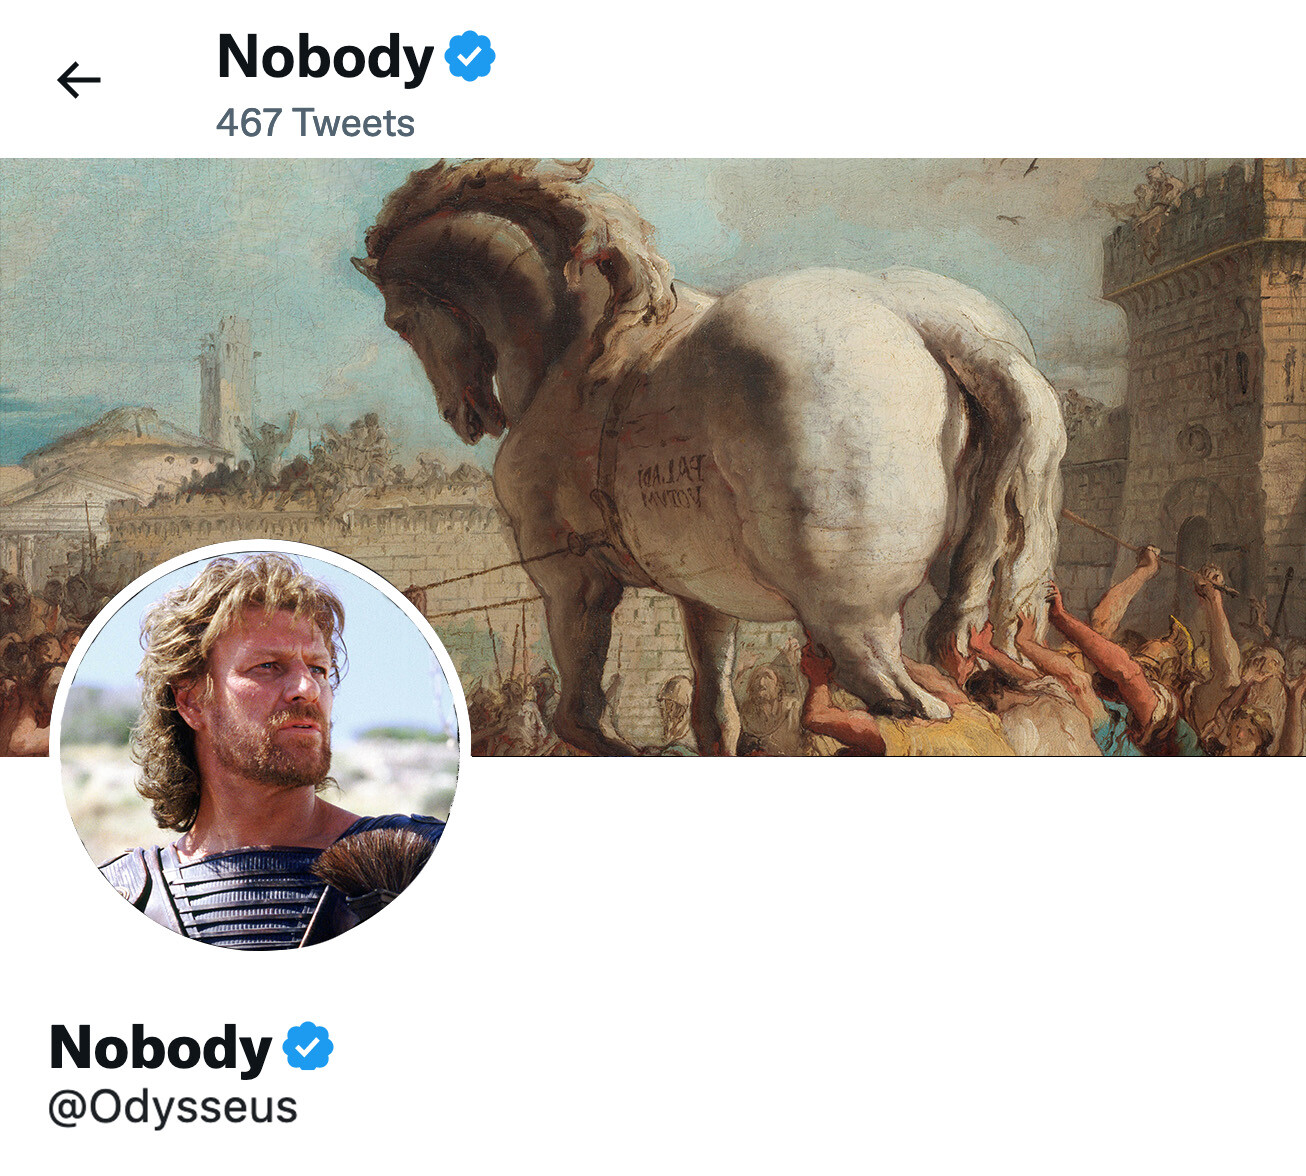 Odysseus's Twitter profile with the verified name as "Nobody" with a picture of Sean Bean as Odysseus and a painting of the Trojan Horse as the header image.